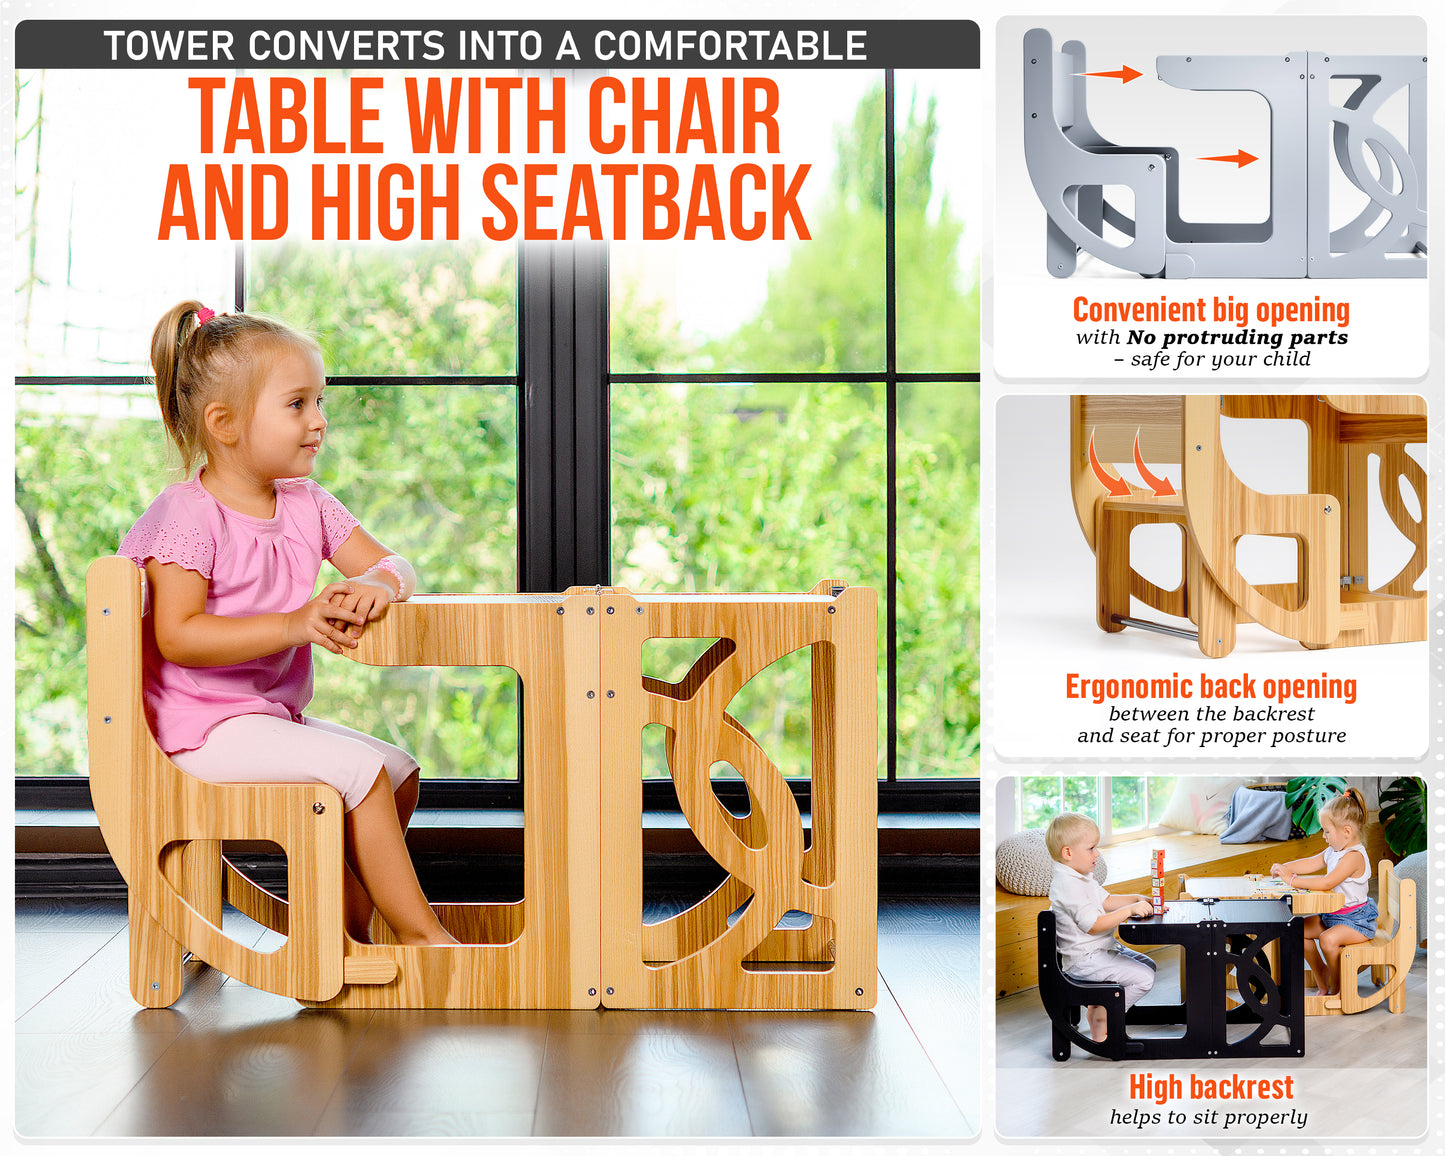 Montessori learning stool Table & Chair, learning toddler tower - Climbambino